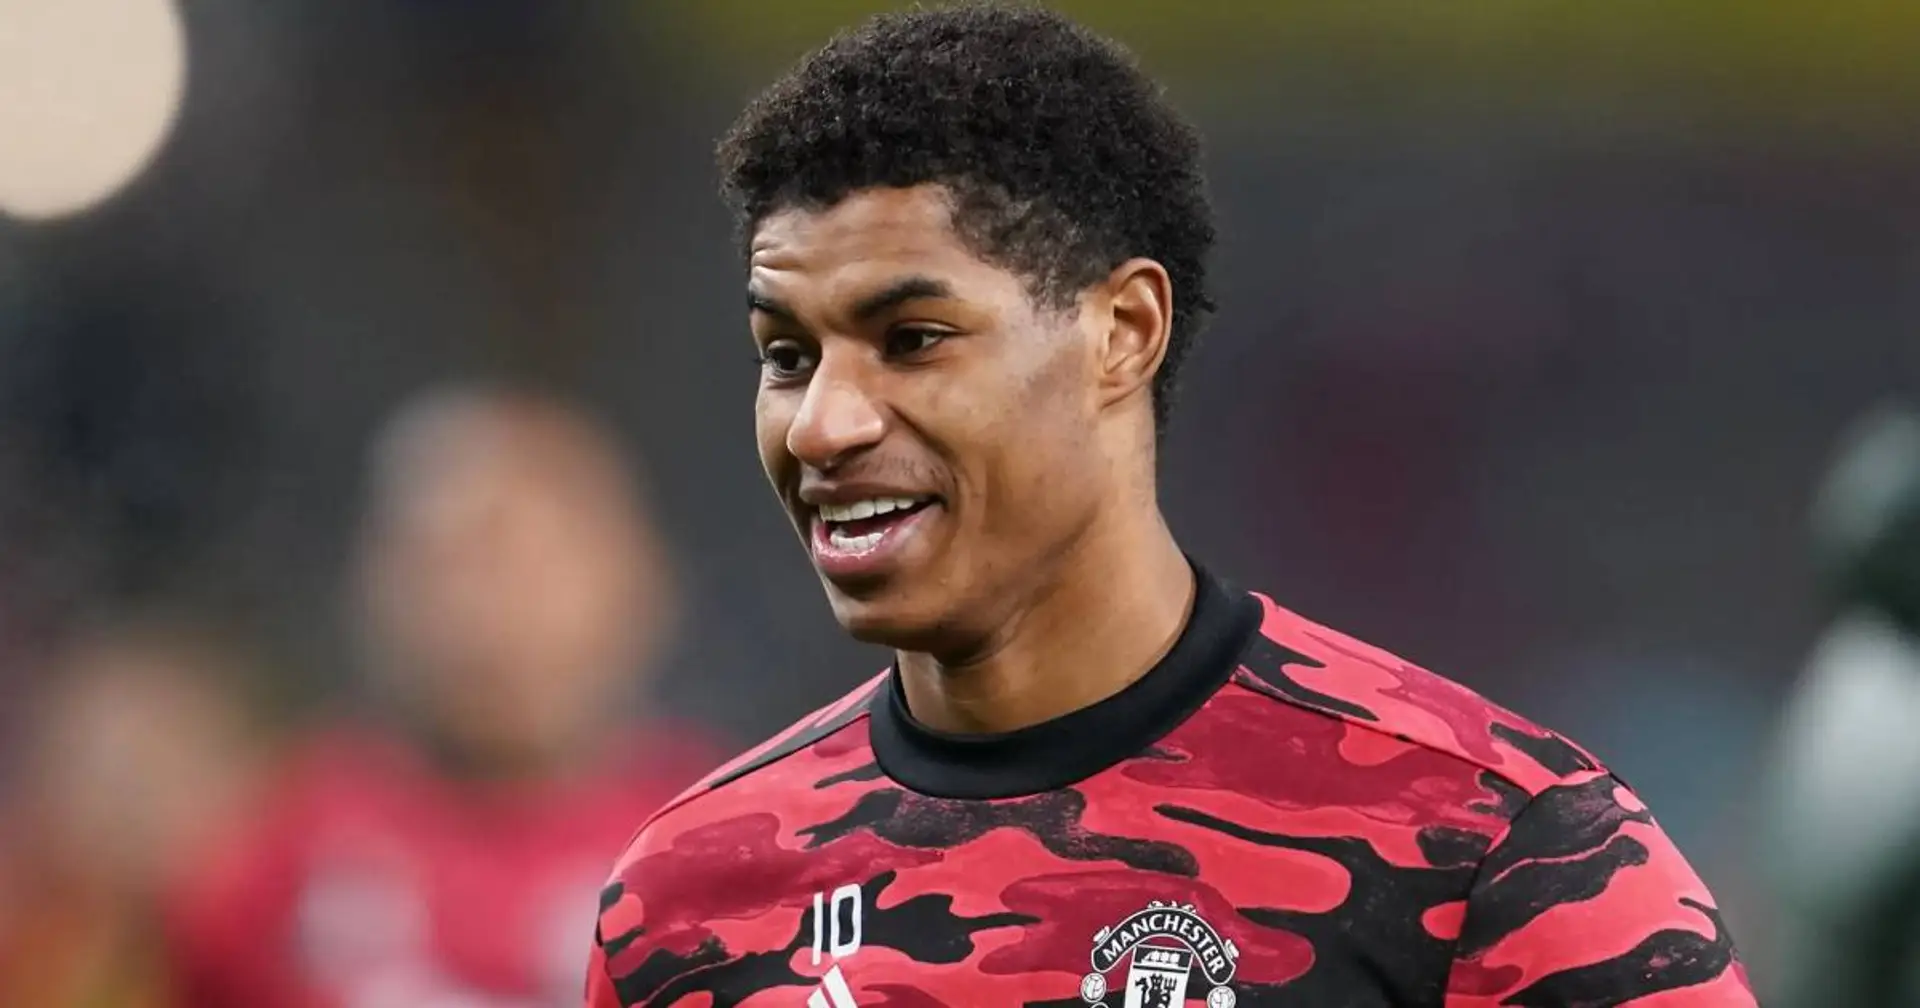 'He's very excited': Marcus Rashford's stance on leaving Man United for PSG revealed